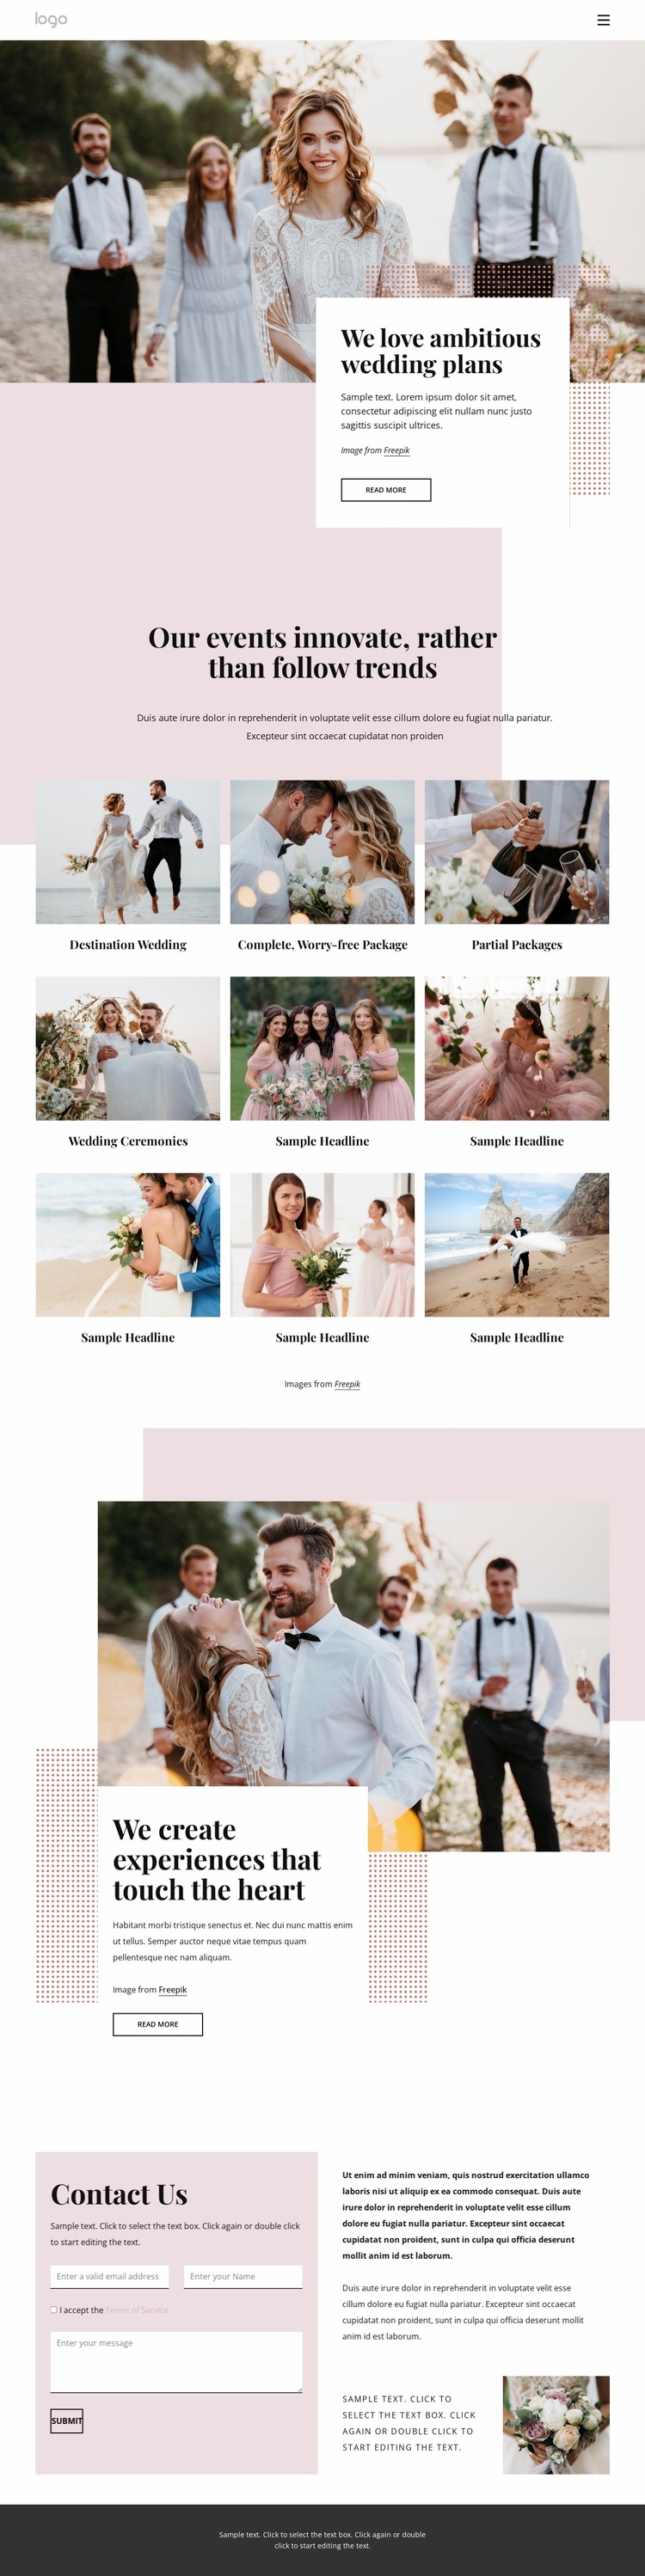 We love ambitious wedding plans Landing Page